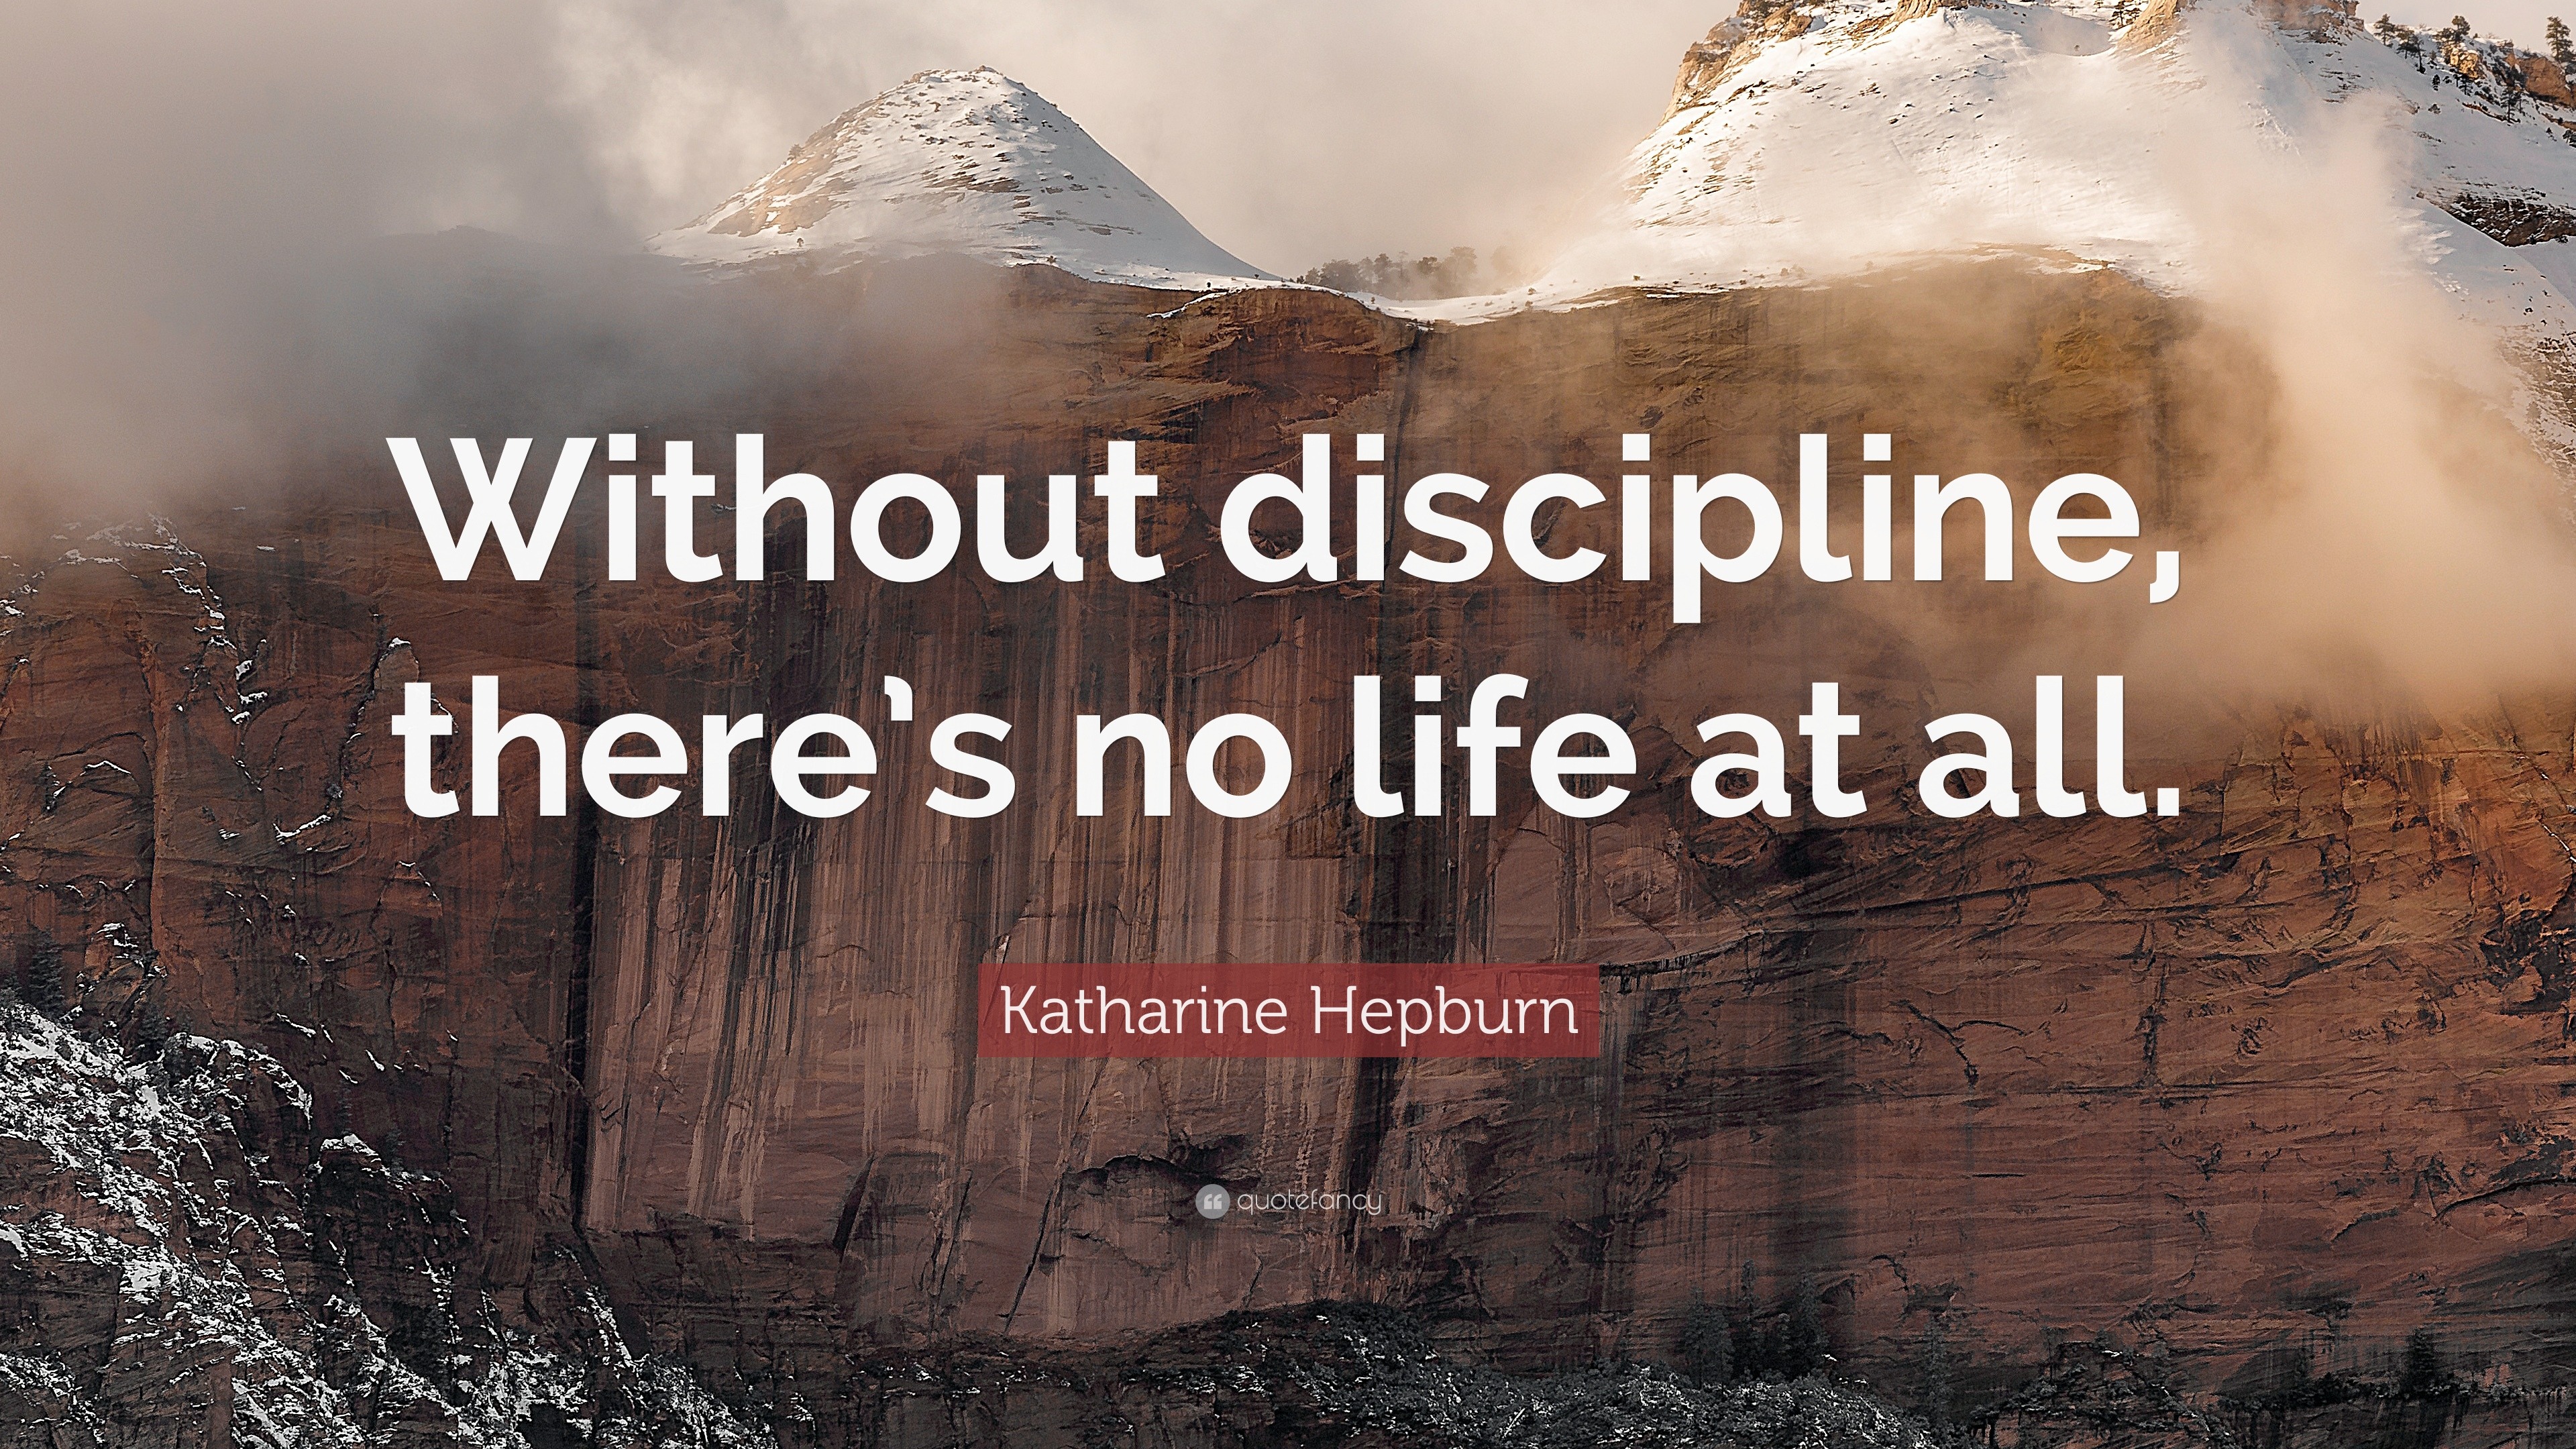 Katharine Hepburn Quote “Without discipline there s no life at all ”